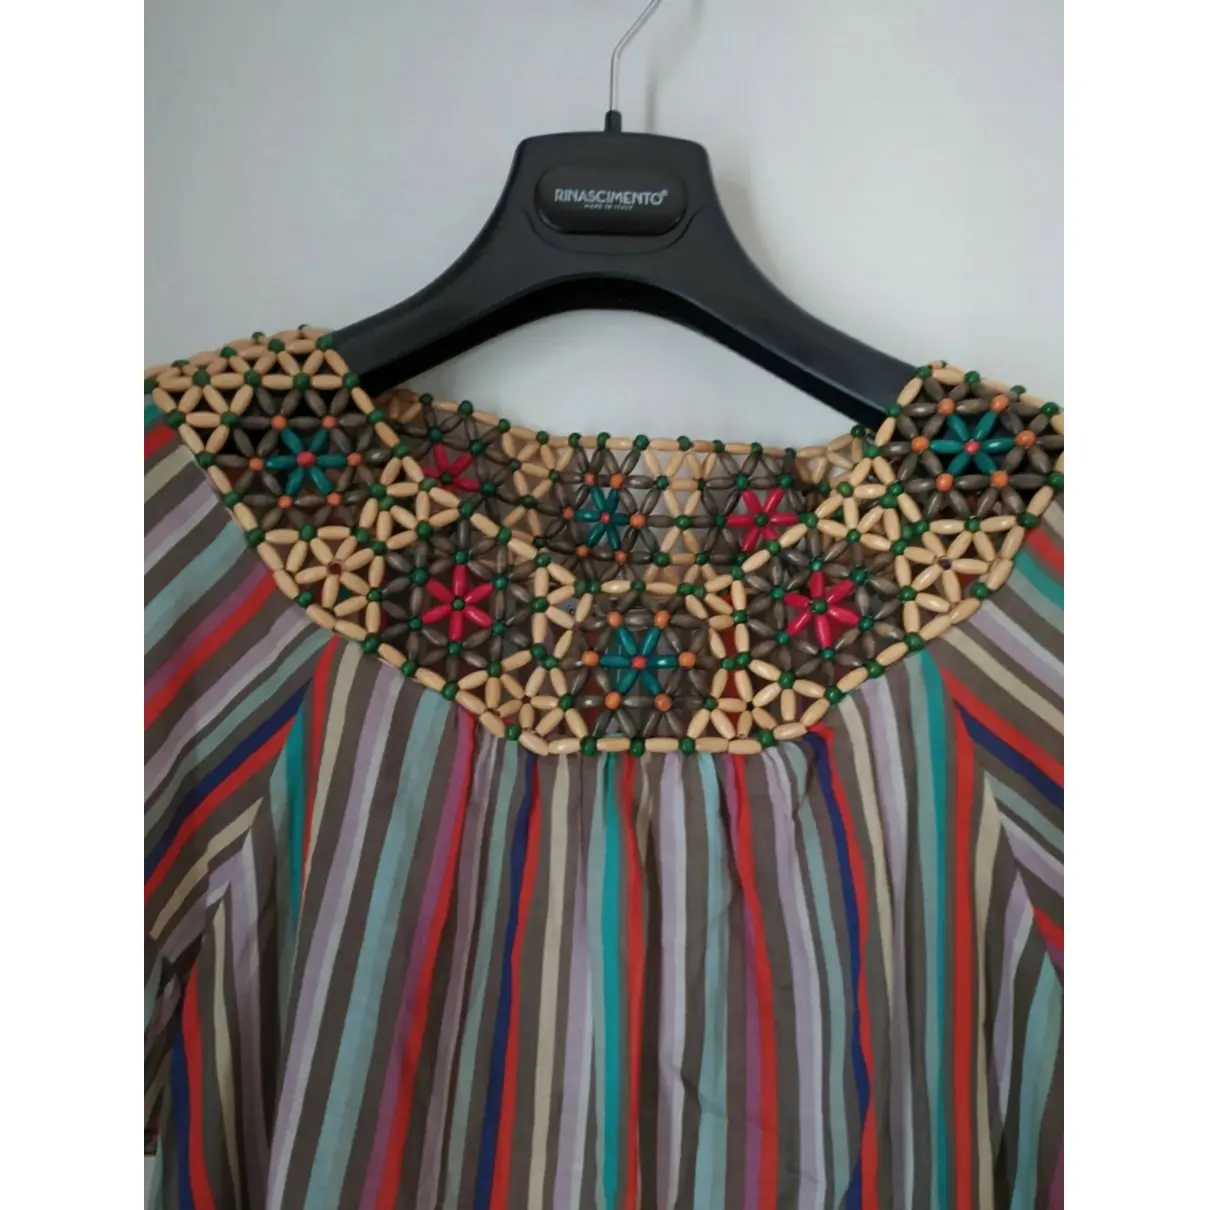 Buy Cacharel Blouse online